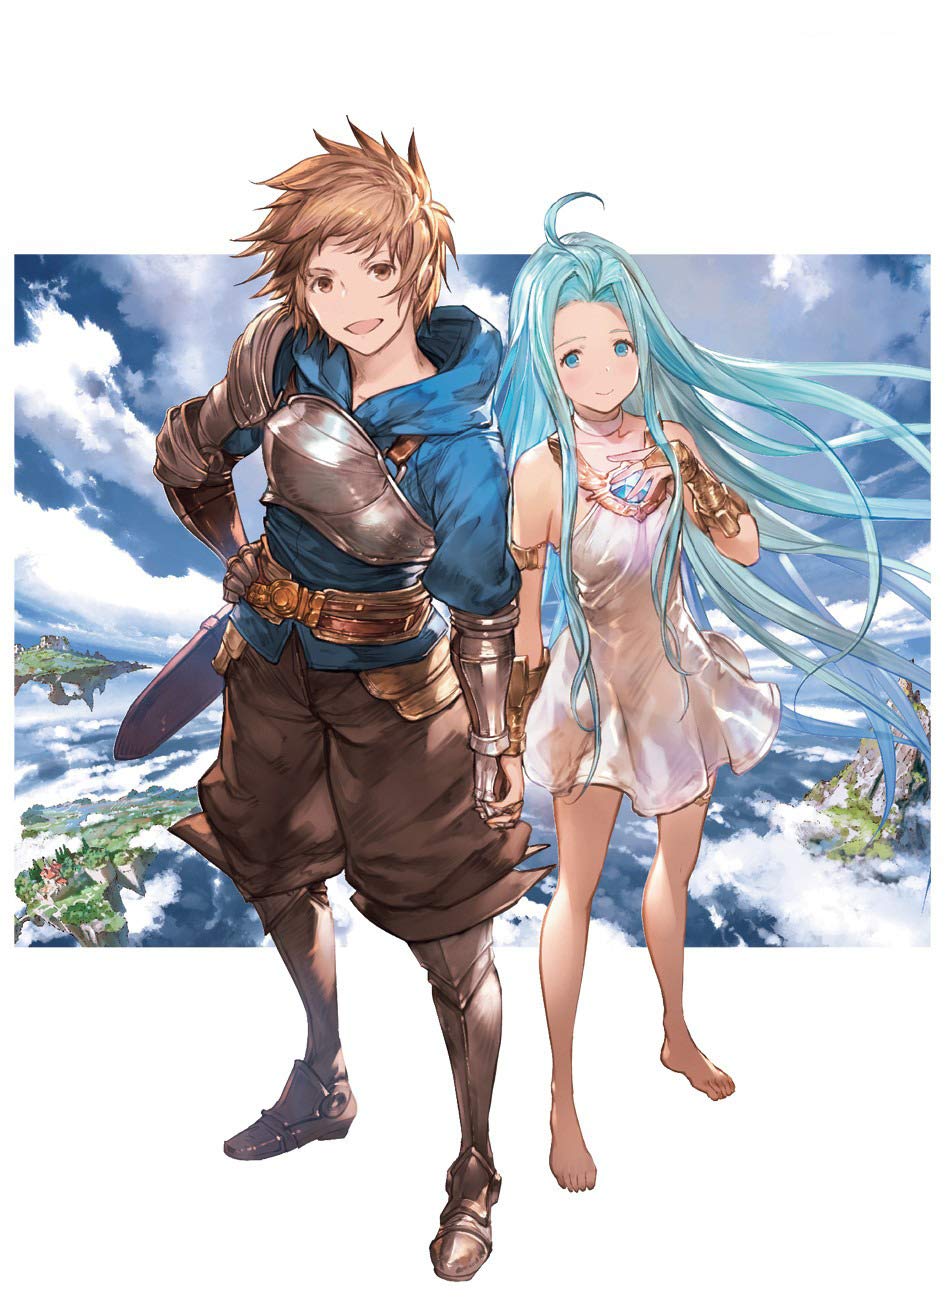 Granblue Fantasy  The Animation Bluray Cover Collection  Halcyon Realms   Art Book Reviews  Anime Manga Film Photography